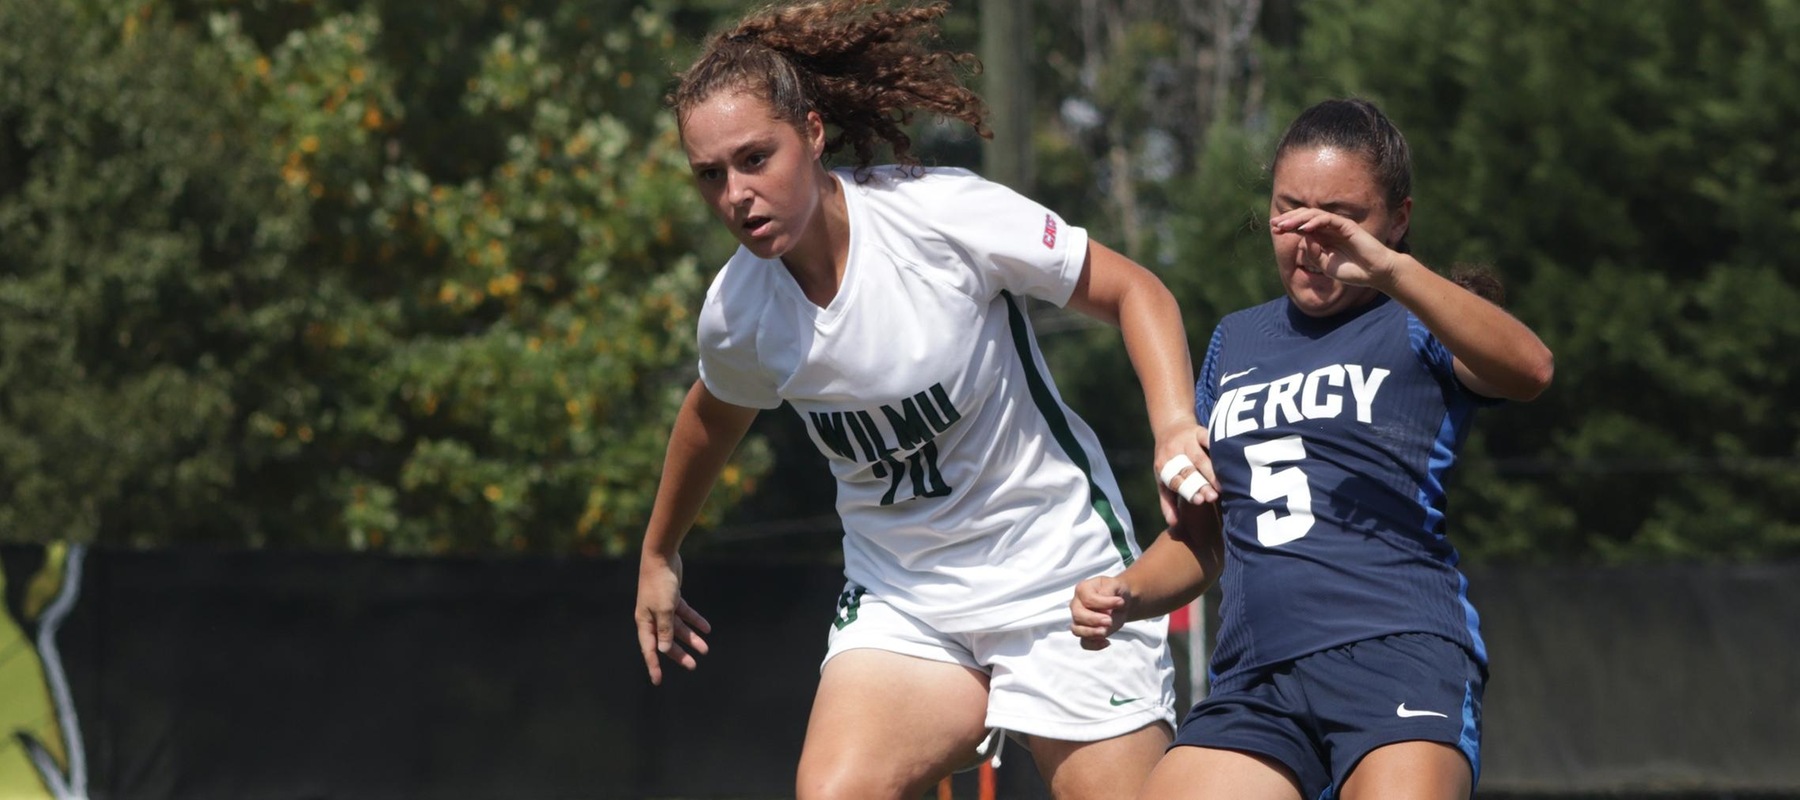 File photo of Samantha Emmi who scored her fourth goal of the year against Dominican on Saturday. Copyright 2022; Wilmington University. All rights reserved. Photo by Victor Molina.